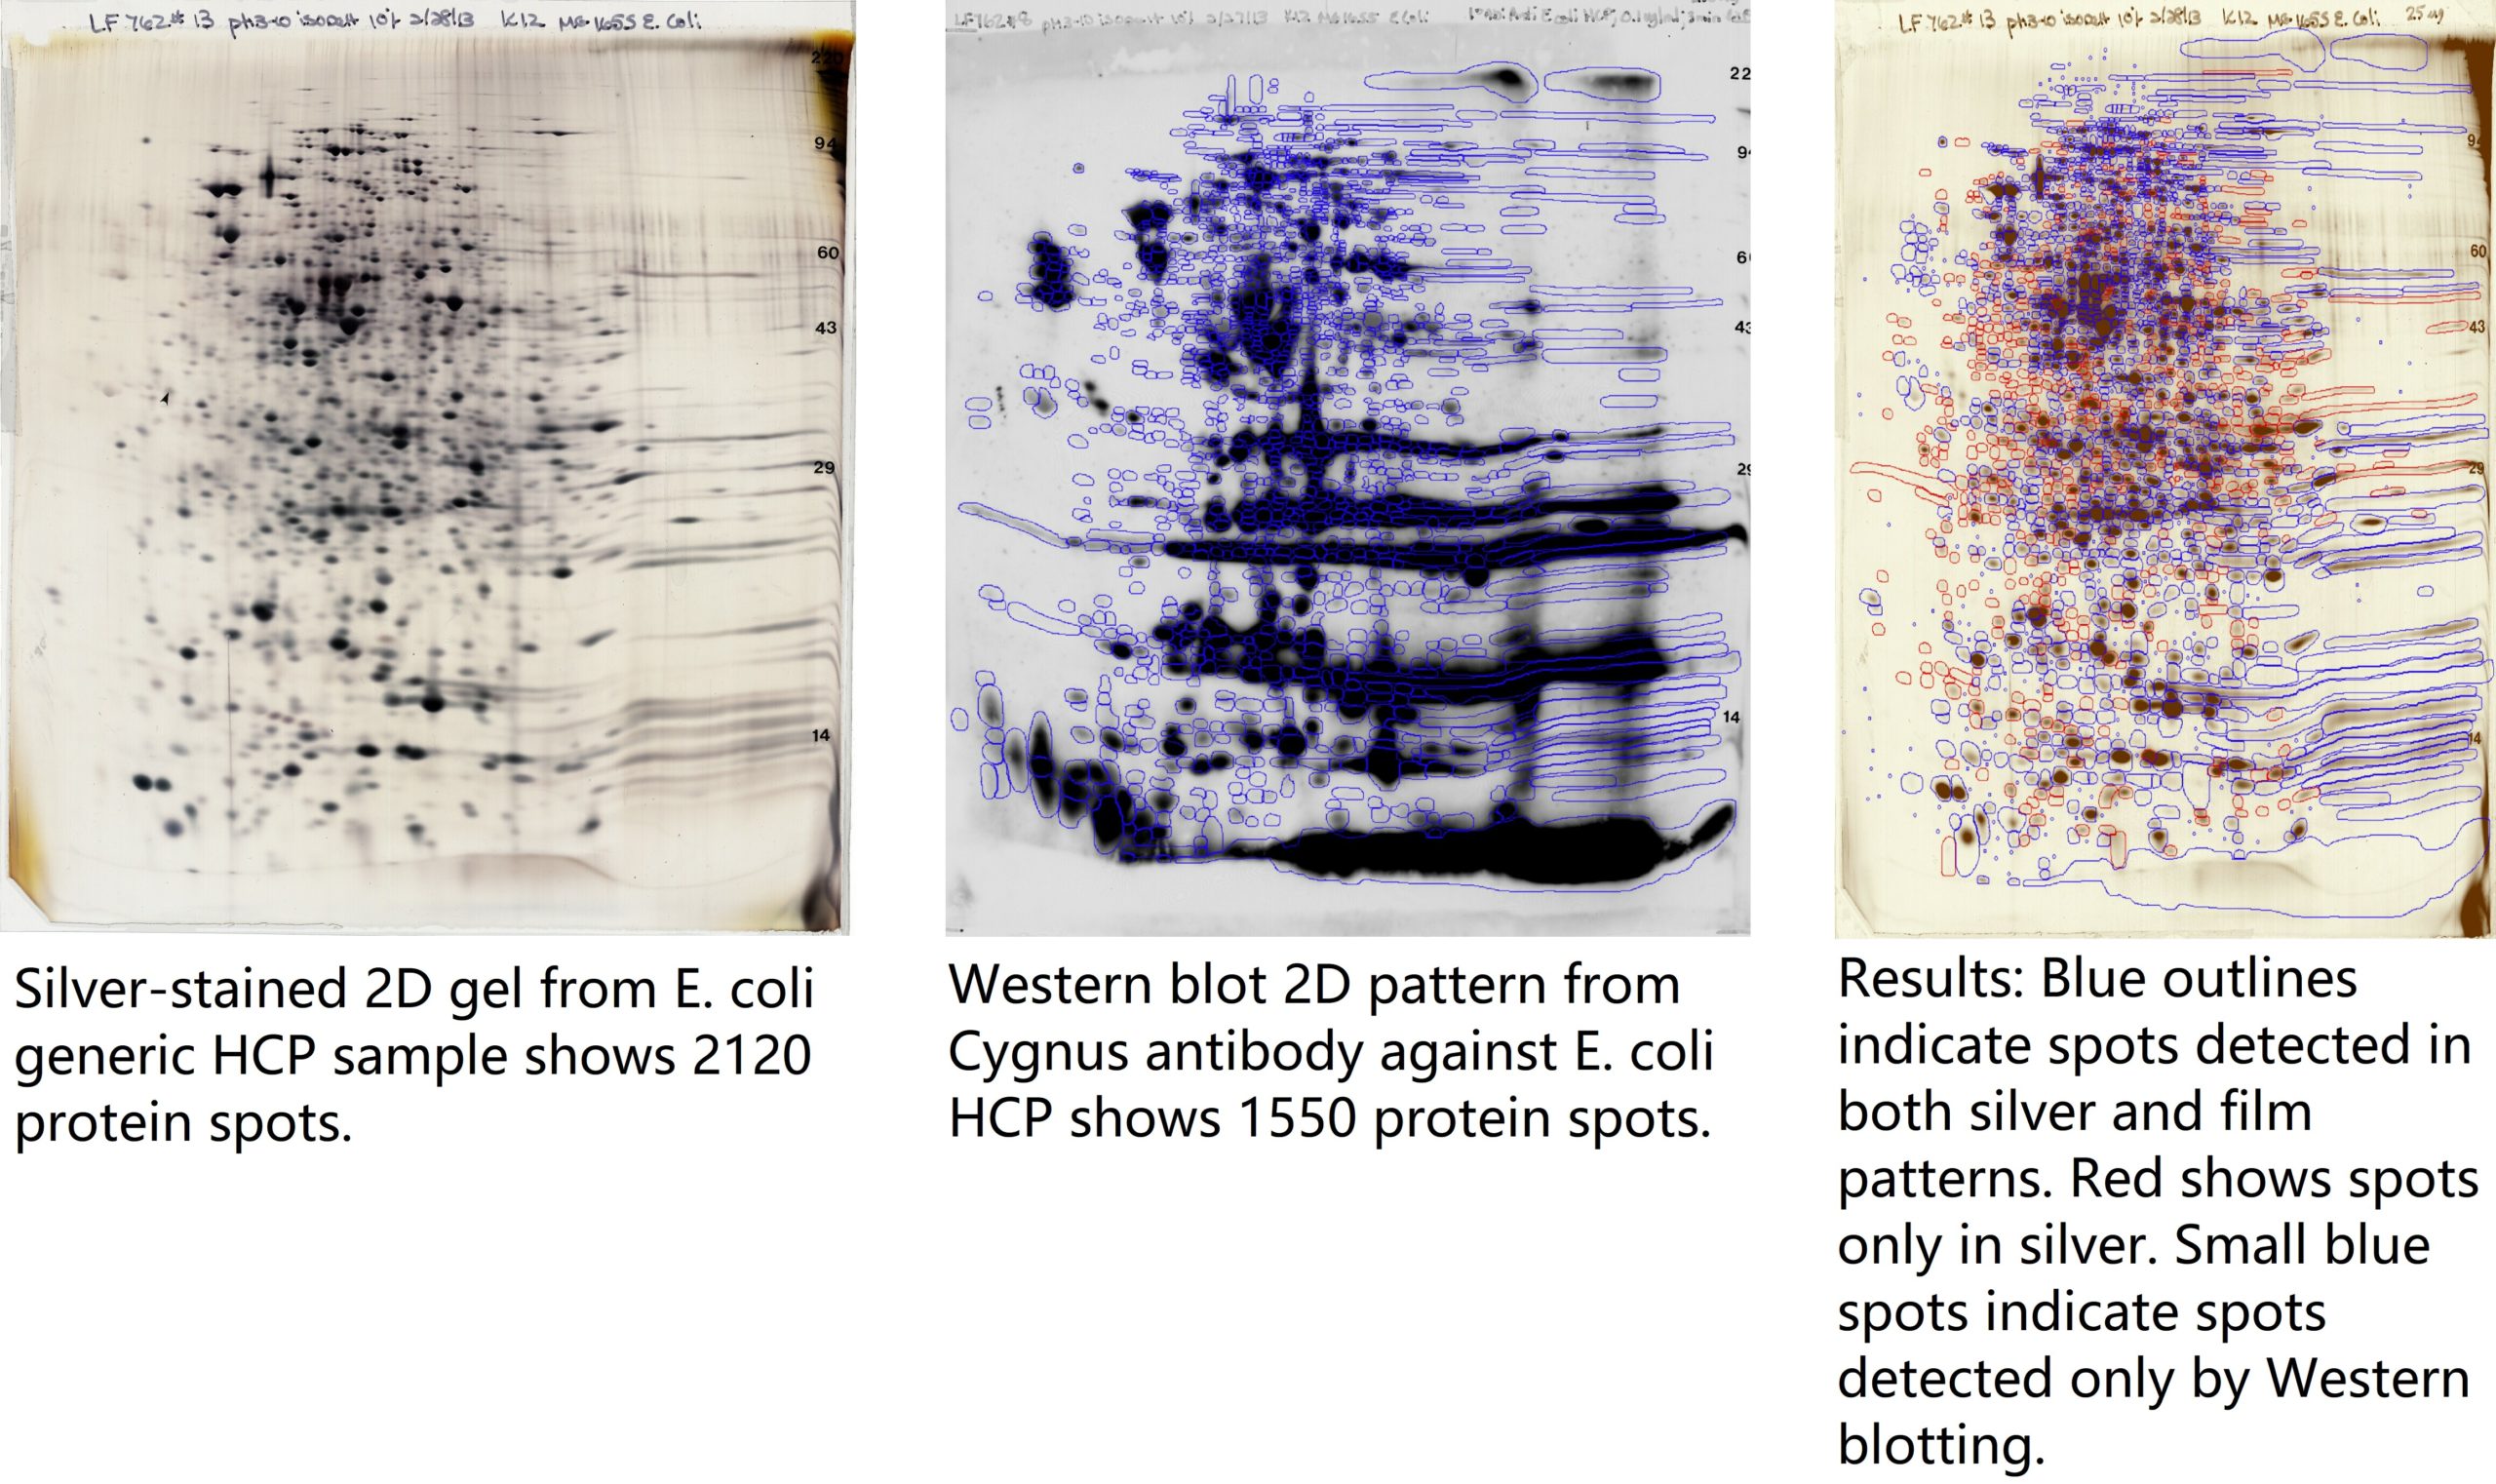 2D Gel HCP analysis difference image: comparison of anti-HCP Western blot & 2D gel (total protein)